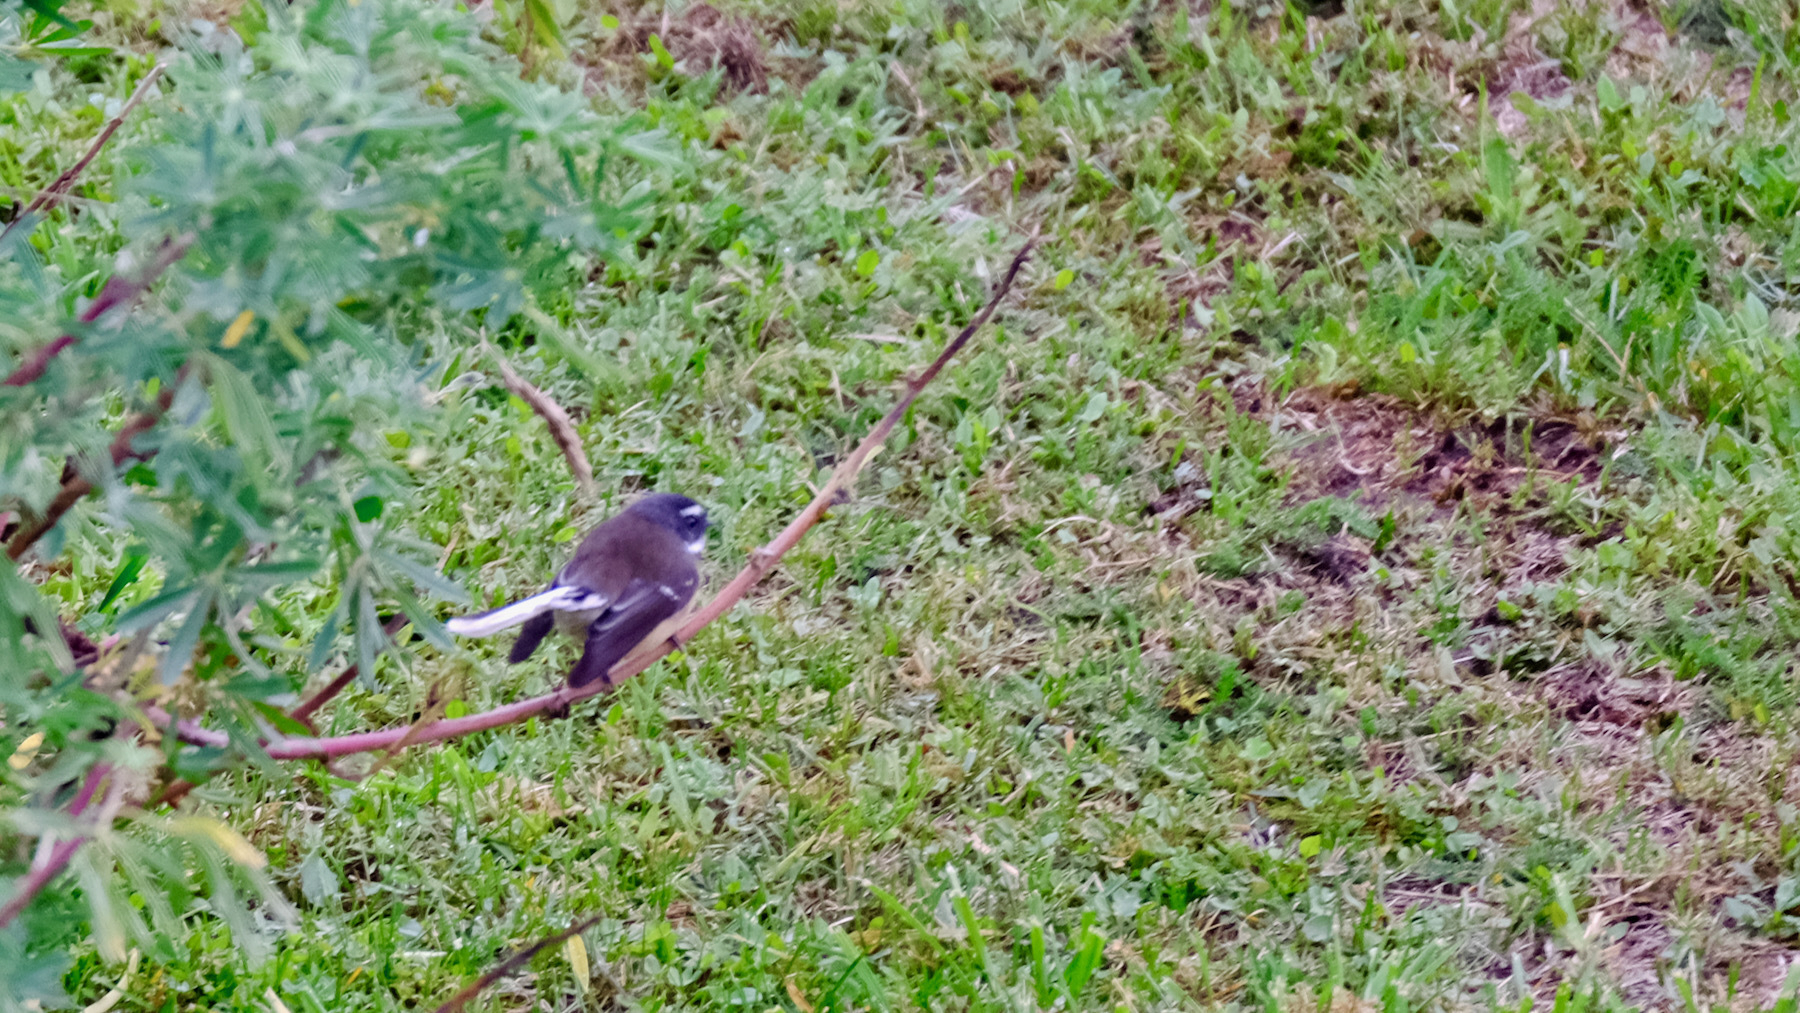 Small bird with fan-shaped tail, sitting on a twig. 